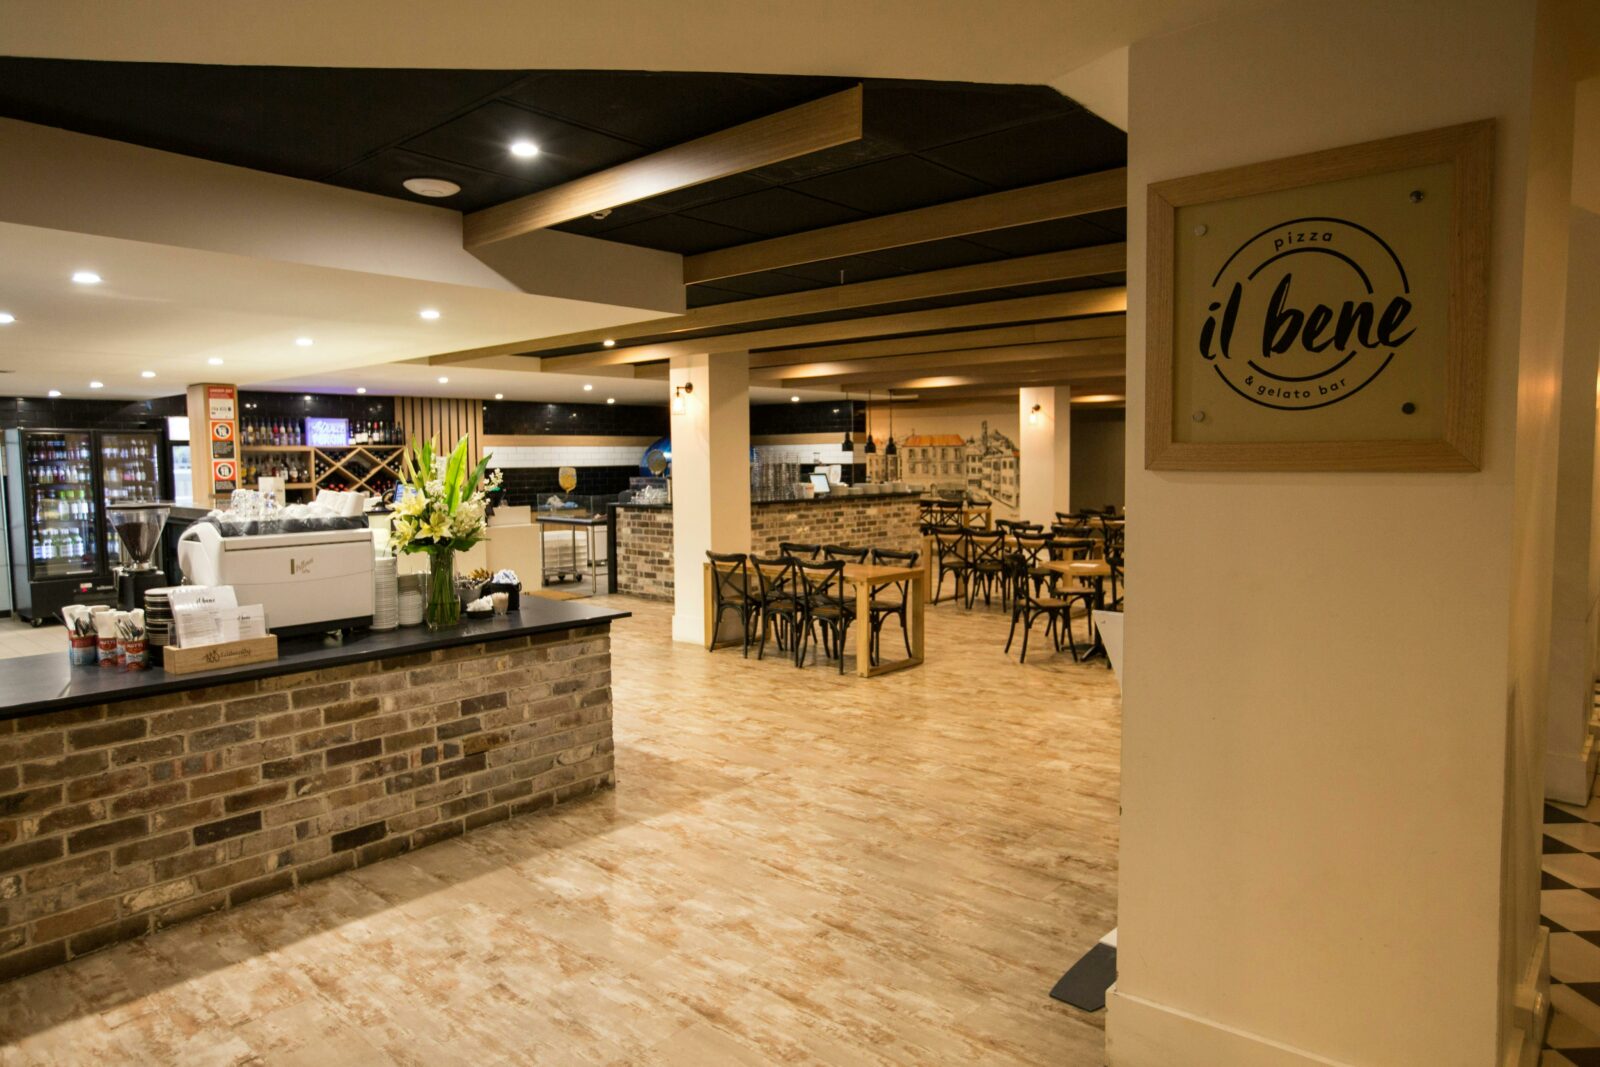 Il Bene Pizza dining room